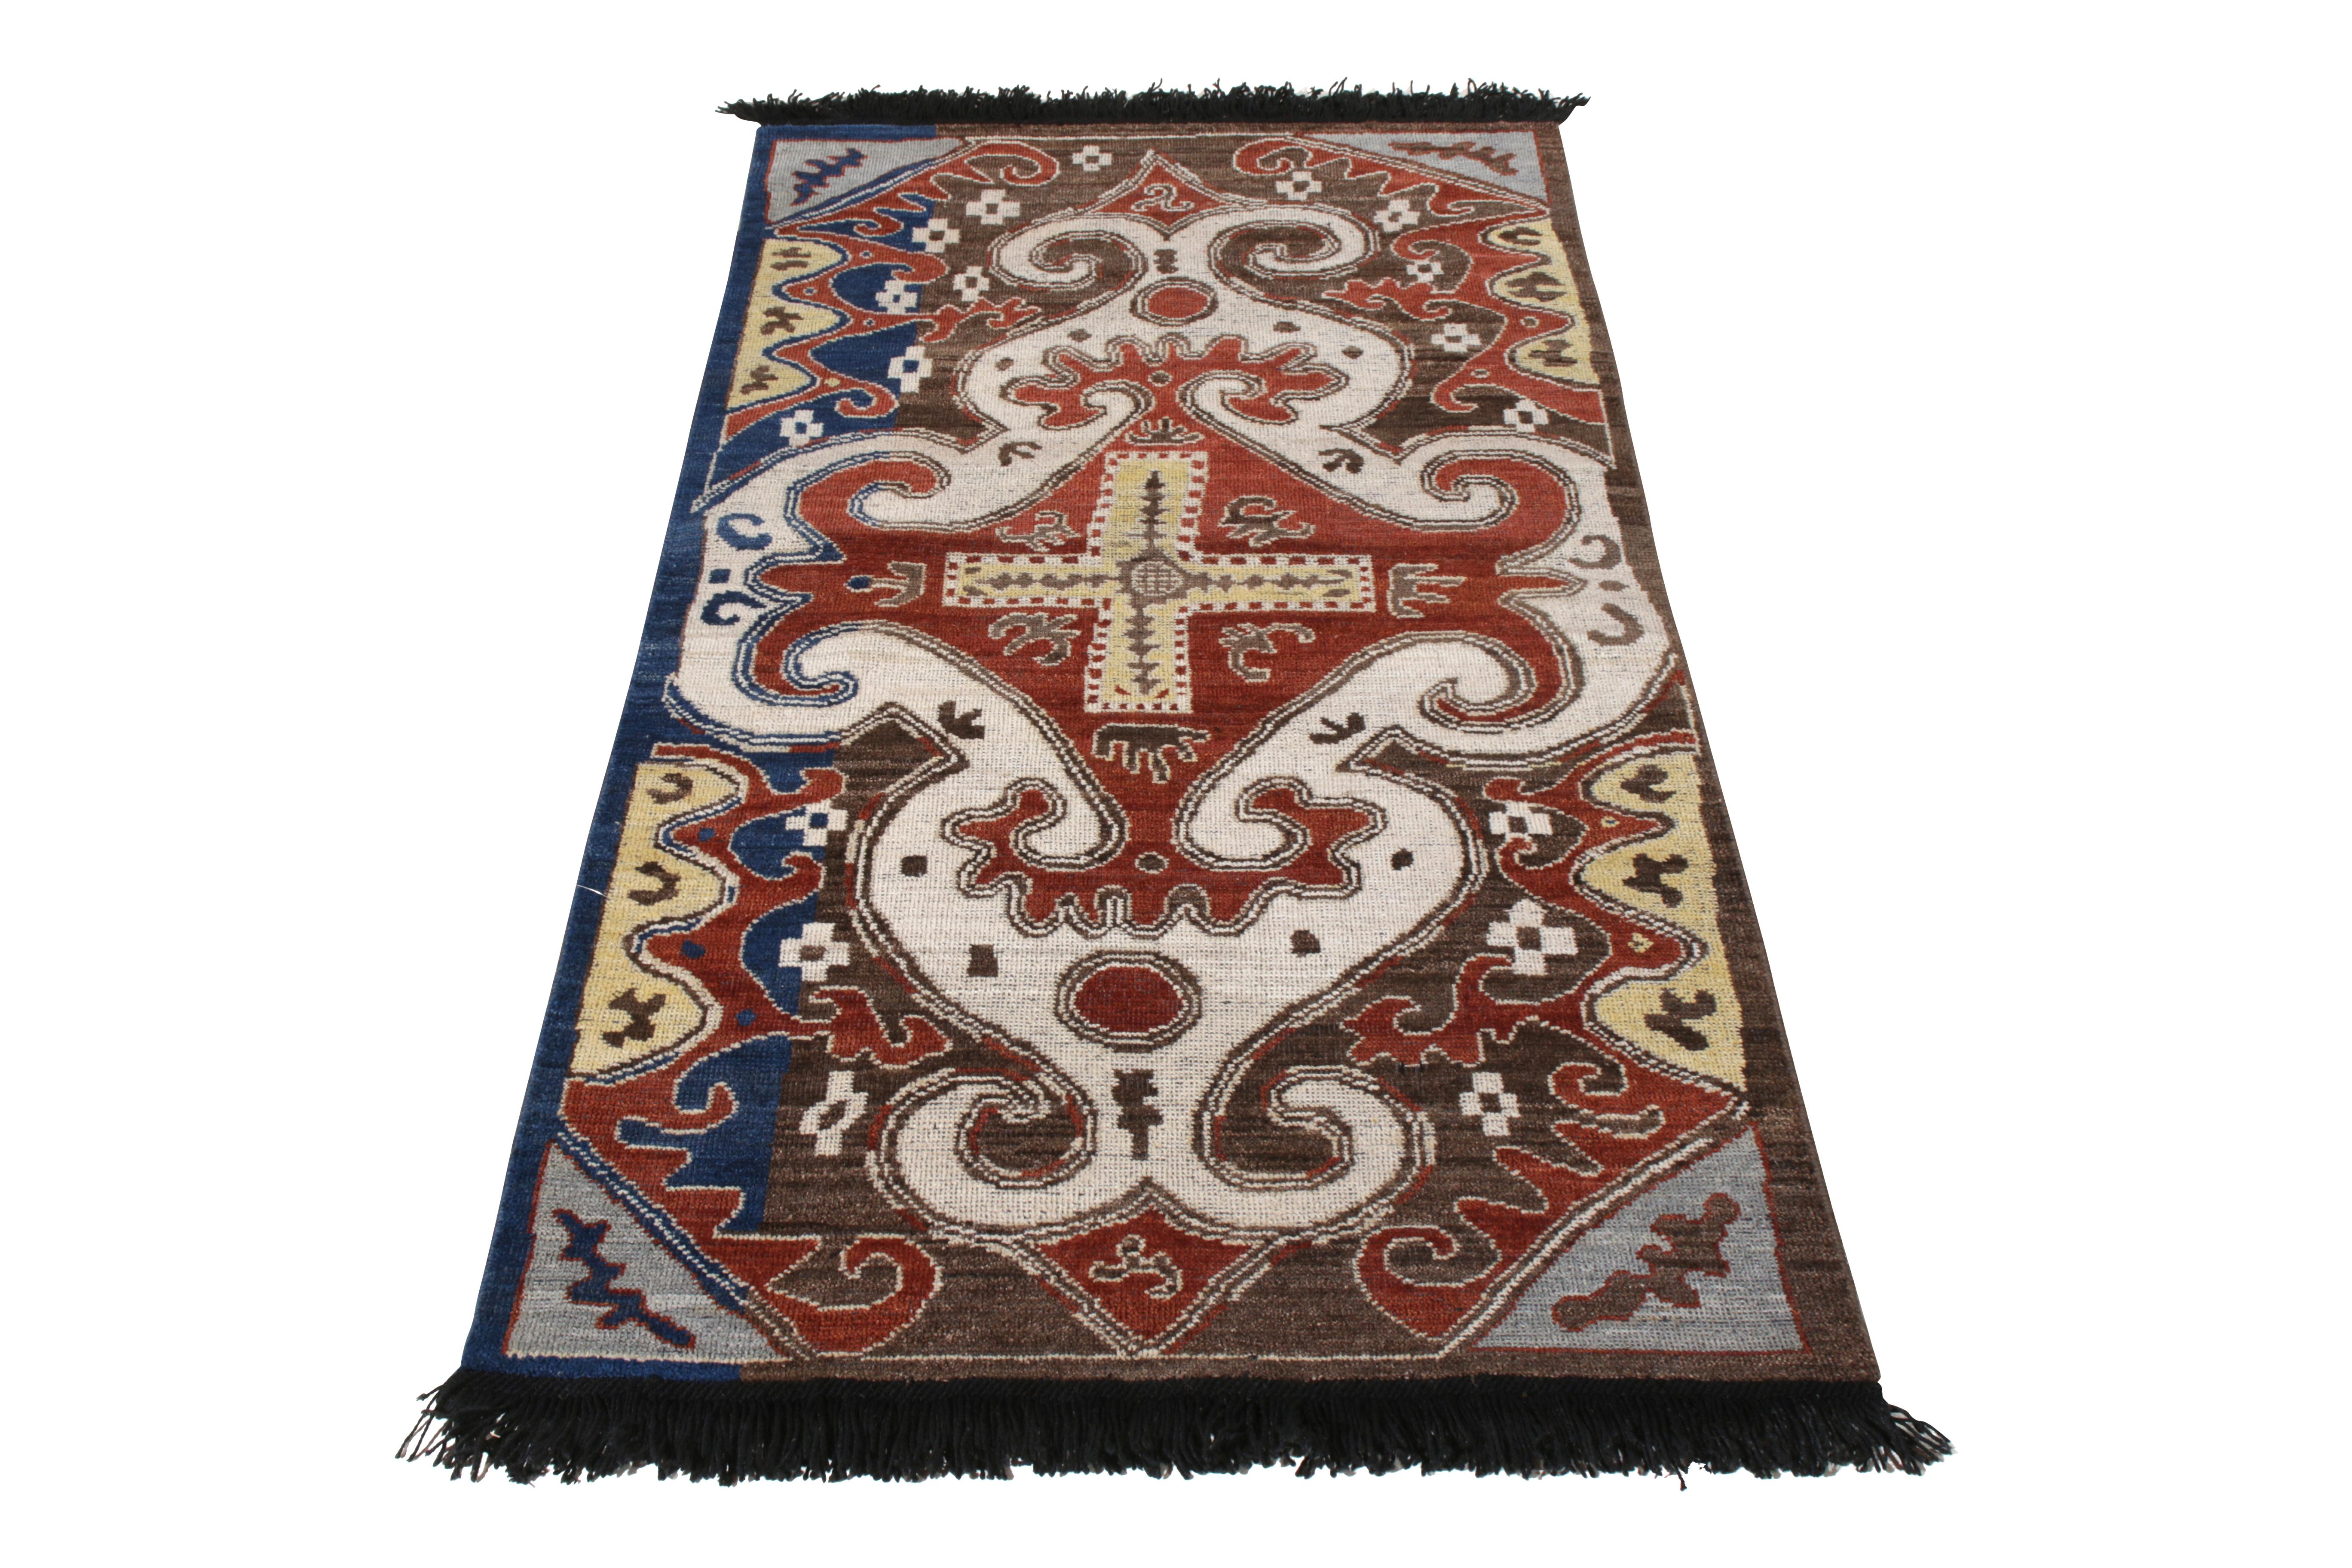 A 3x6 runner hand knotted in notably soft Ghazni wool, from Rug & Kilim’s Burano Collection. 

Nodding to 18th century tribal embroidery styles in rare caucasian textiles, with rich red prevailing in the multicolor medallion pattern.

Arresting